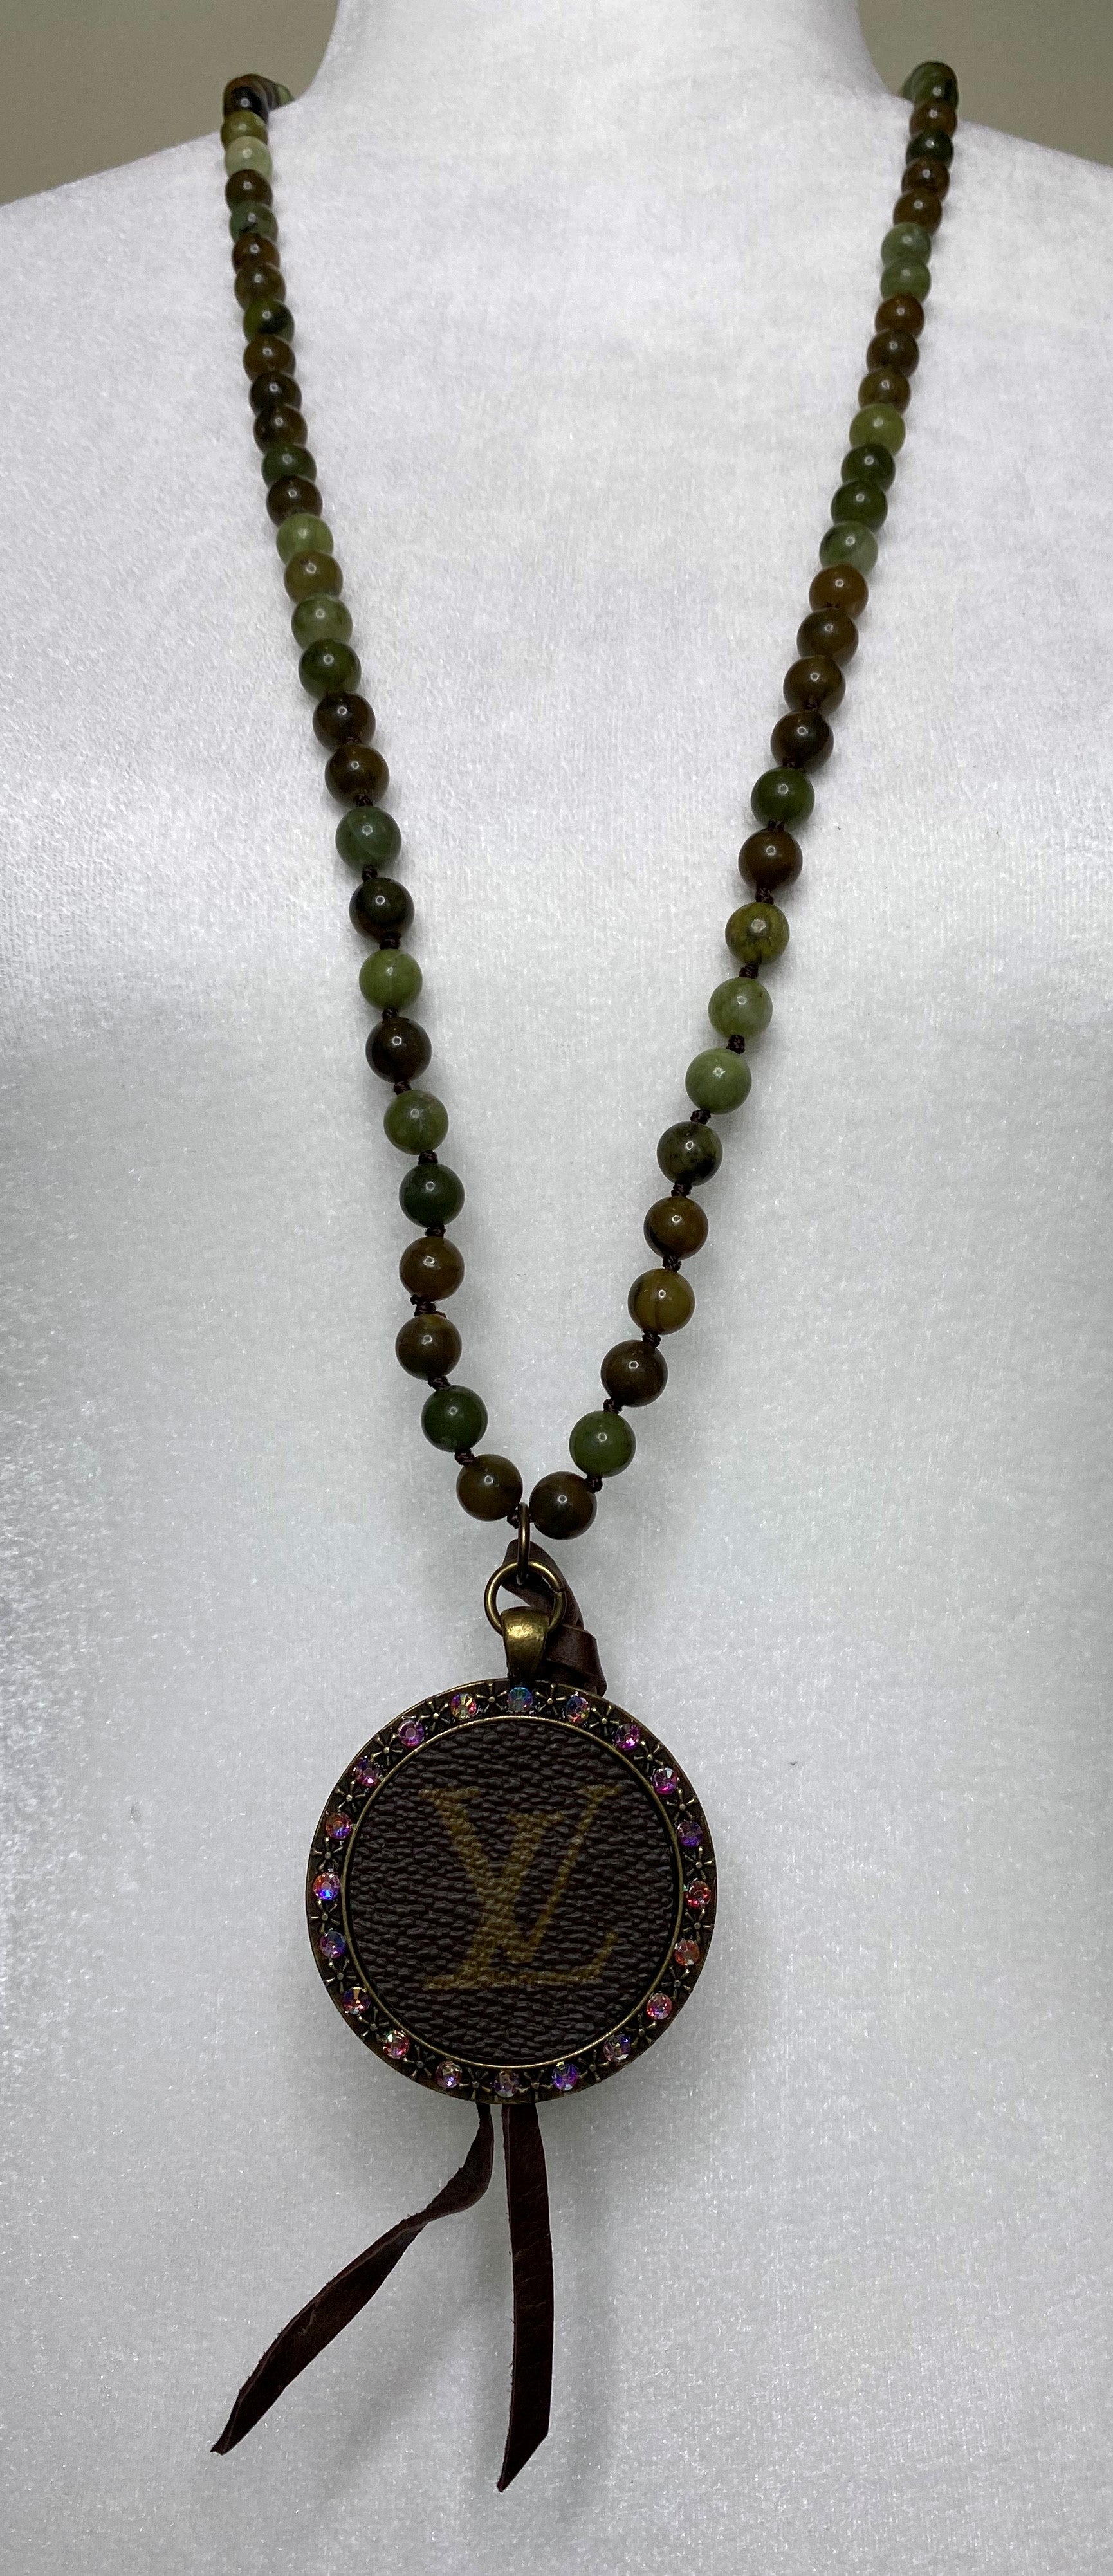 Louis Vuitton, Jewelry, Authentic Louis Vuitton Upcycled Necklace Green